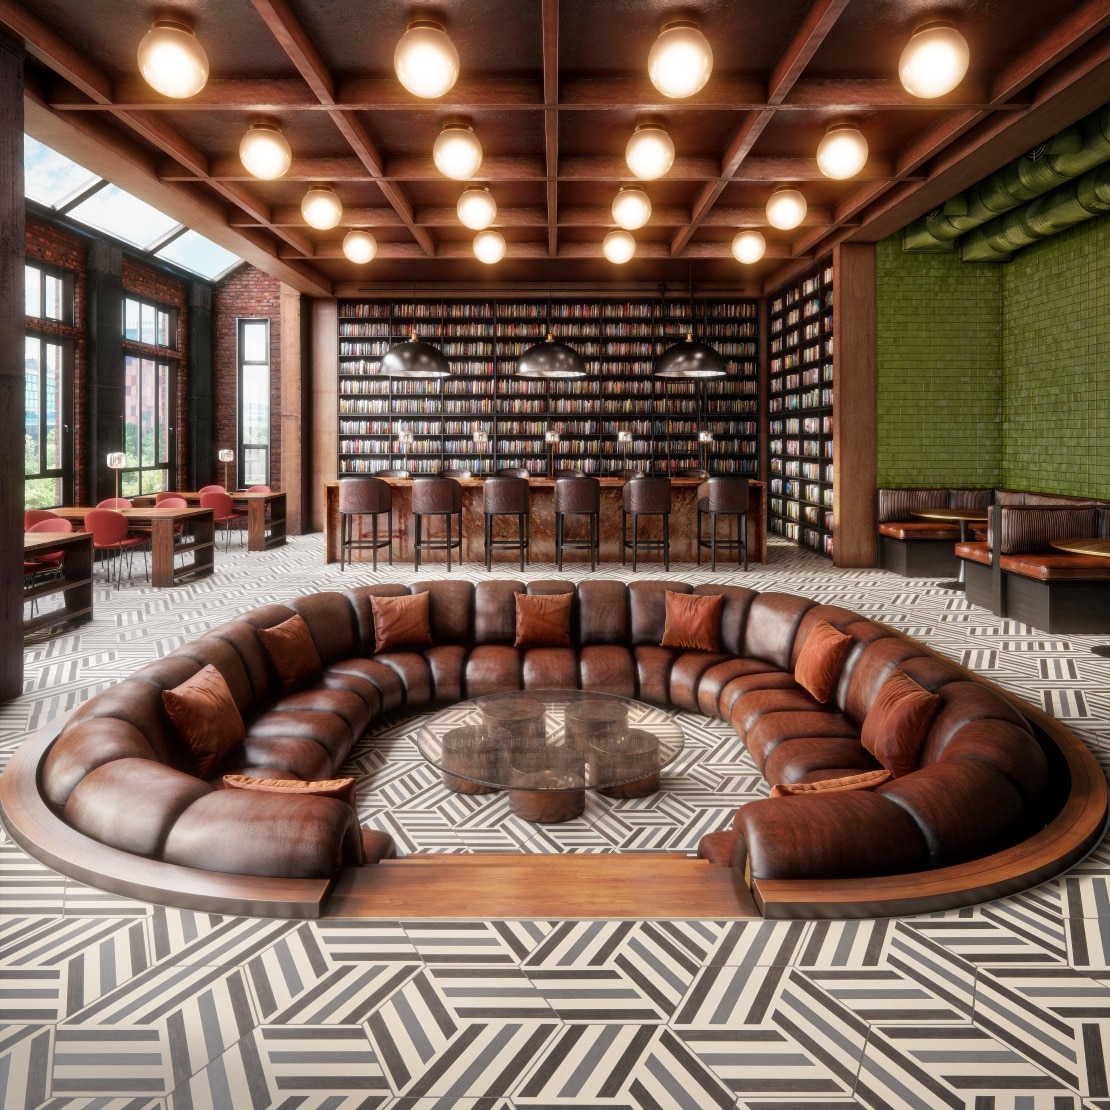 Mid century modern library with sunken leather seating area.